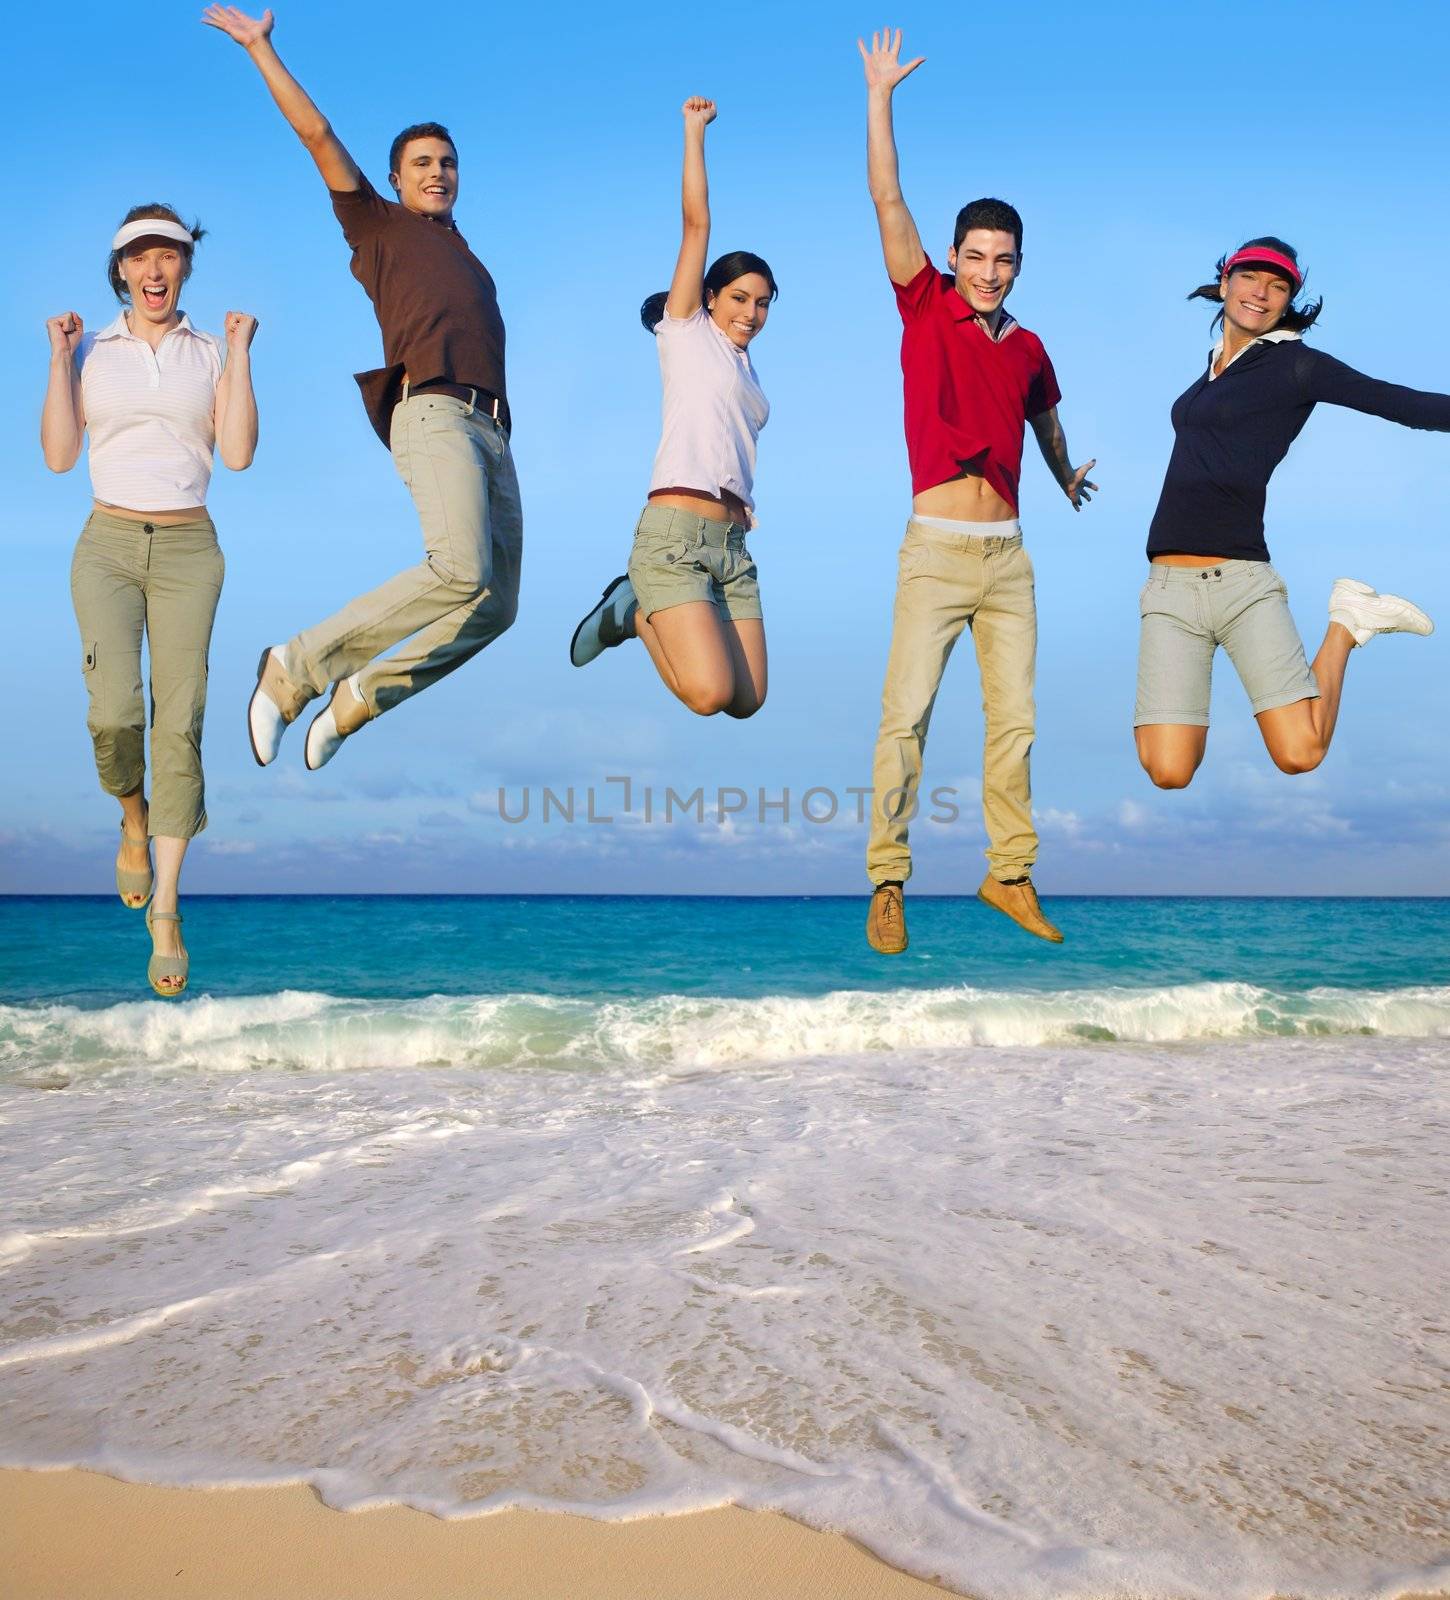 Jumping young people happy group vacation tropical beach